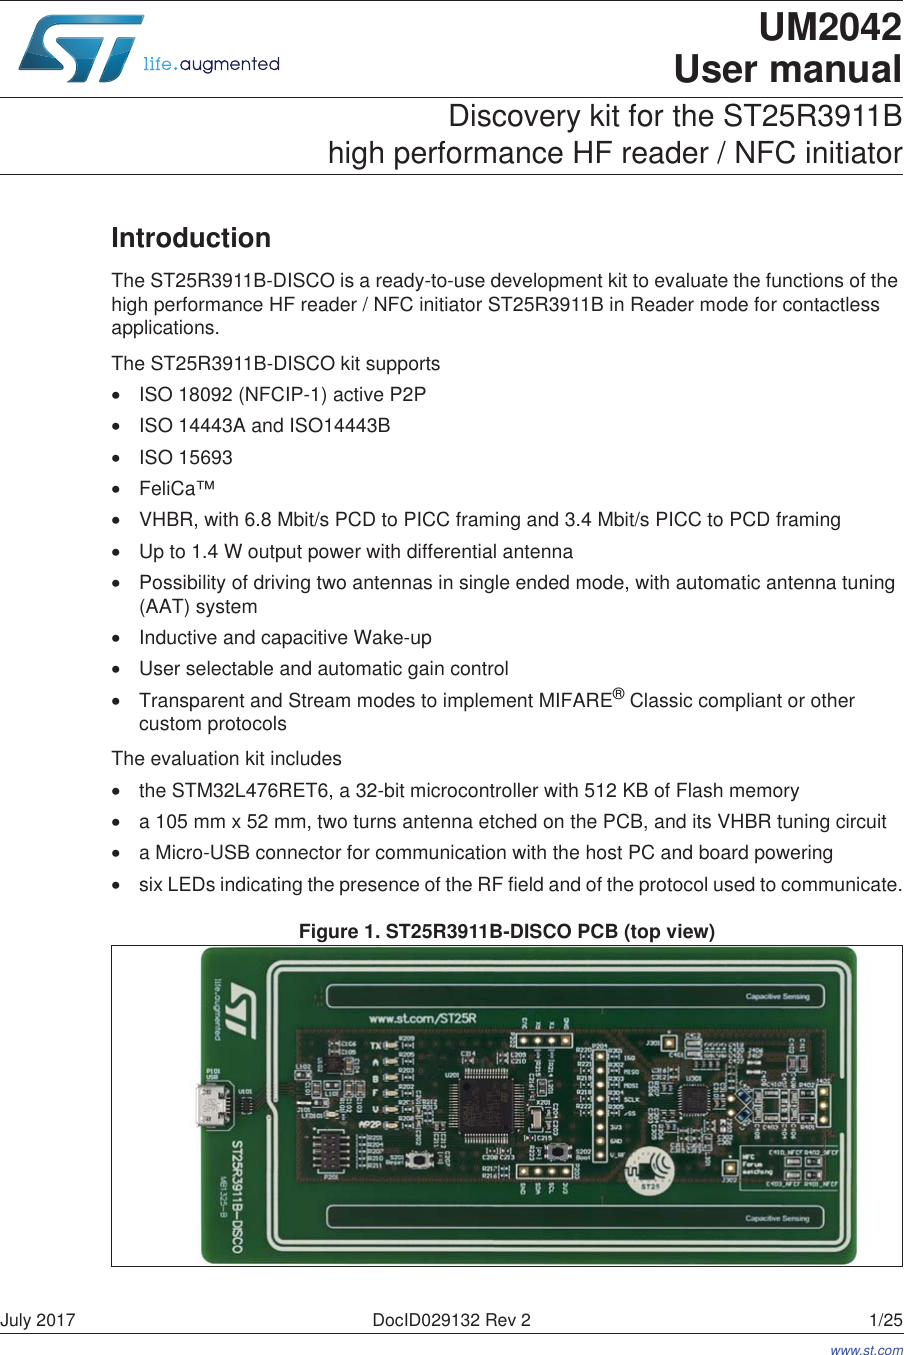 July 2017 DocID029132 Rev 2 1/251UM2042User manualDiscovery kit for the ST25R3911B  high performance HF reader / NFC initiatorIntroductionThe ST25R3911B-DISCO is a ready-to-use development kit to evaluate the functions of the high performance HF reader / NFC initiator ST25R3911B in Reader mode for contactless applications.The ST25R3911B-DISCO kit supports•ISO 18092 (NFCIP-1) active P2P•ISO 14443A and ISO14443B•ISO 15693•FeliCa™•VHBR, with 6.8 Mbit/s PCD to PICC framing and 3.4 Mbit/s PICC to PCD framing•Up to 1.4 W output power with differential antenna•Possibility of driving two antennas in single ended mode, with automatic antenna tuning (AAT) system•Inductive and capacitive Wake-up•User selectable and automatic gain control•Transparent and Stream modes to implement MIFARE® Classic compliant or other custom protocolsThe evaluation kit includes•the STM32L476RET6, a 32-bit microcontroller with 512 KB of Flash memory•a 105 mm x 52 mm, two turns antenna etched on the PCB, and its VHBR tuning circuit•a Micro-USB connector for communication with the host PC and board powering•six LEDs indicating the presence of the RF field and of the protocol used to communicate.Figure 1. ST25R3911B-DISCO PCB (top view)www.st.com